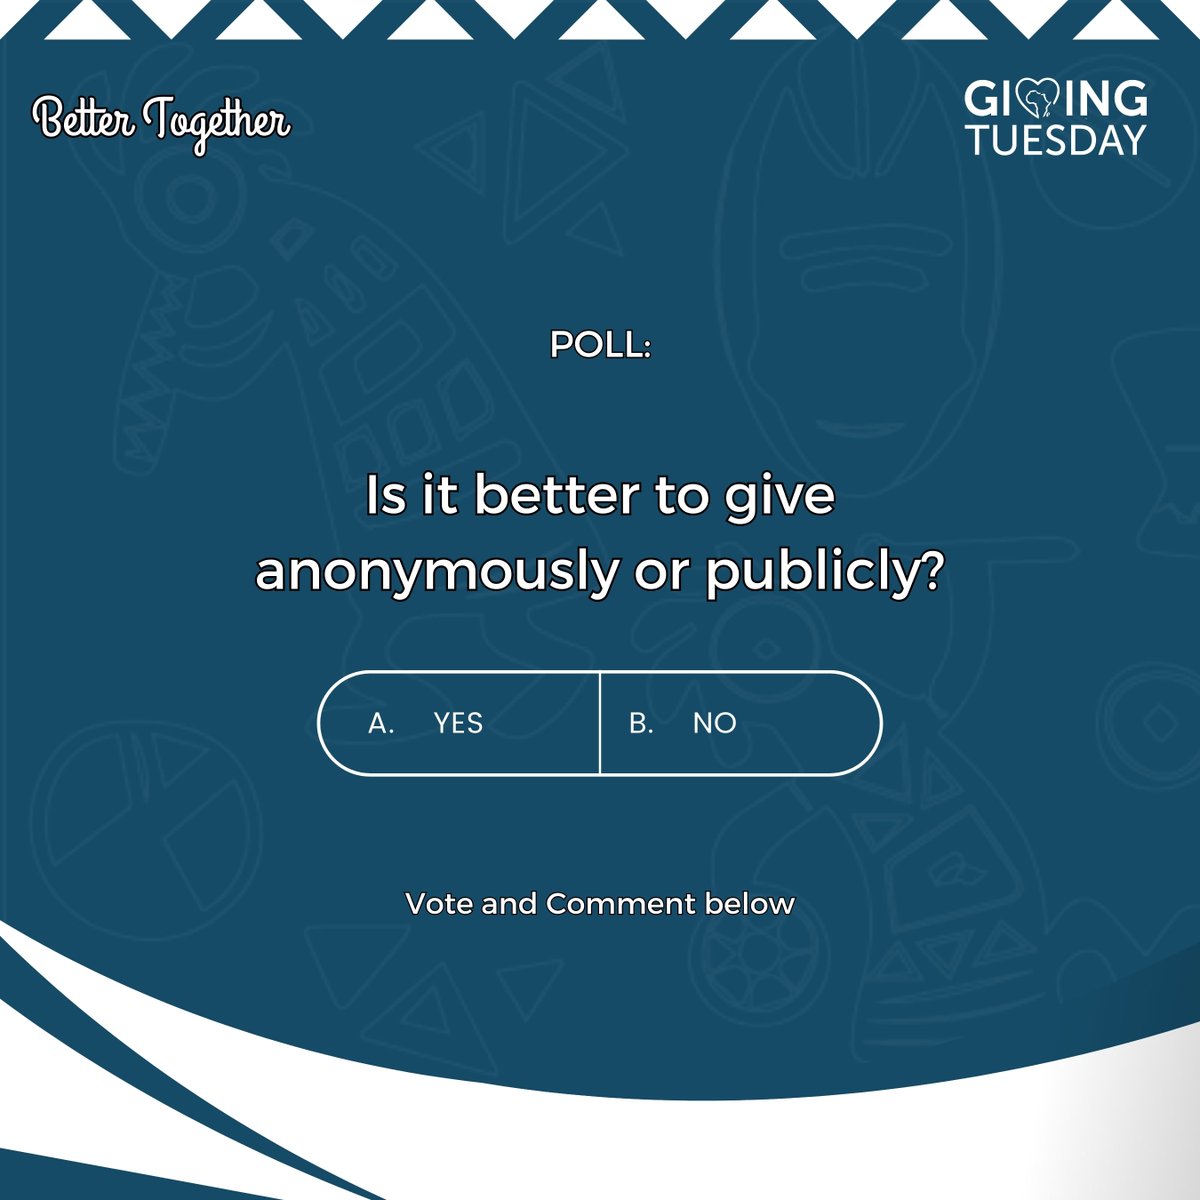 [What do you think?] Does giving anonymously enhance the act of generosity, or does public giving encourage or inspire others to do the same?. . . #Generosity #GivingTuesdayAfrica #GivingTuesday #GiveEveryDay #OrdinaryExxtraordinaryGenerosity #KindnessMatters #ShareYourStory